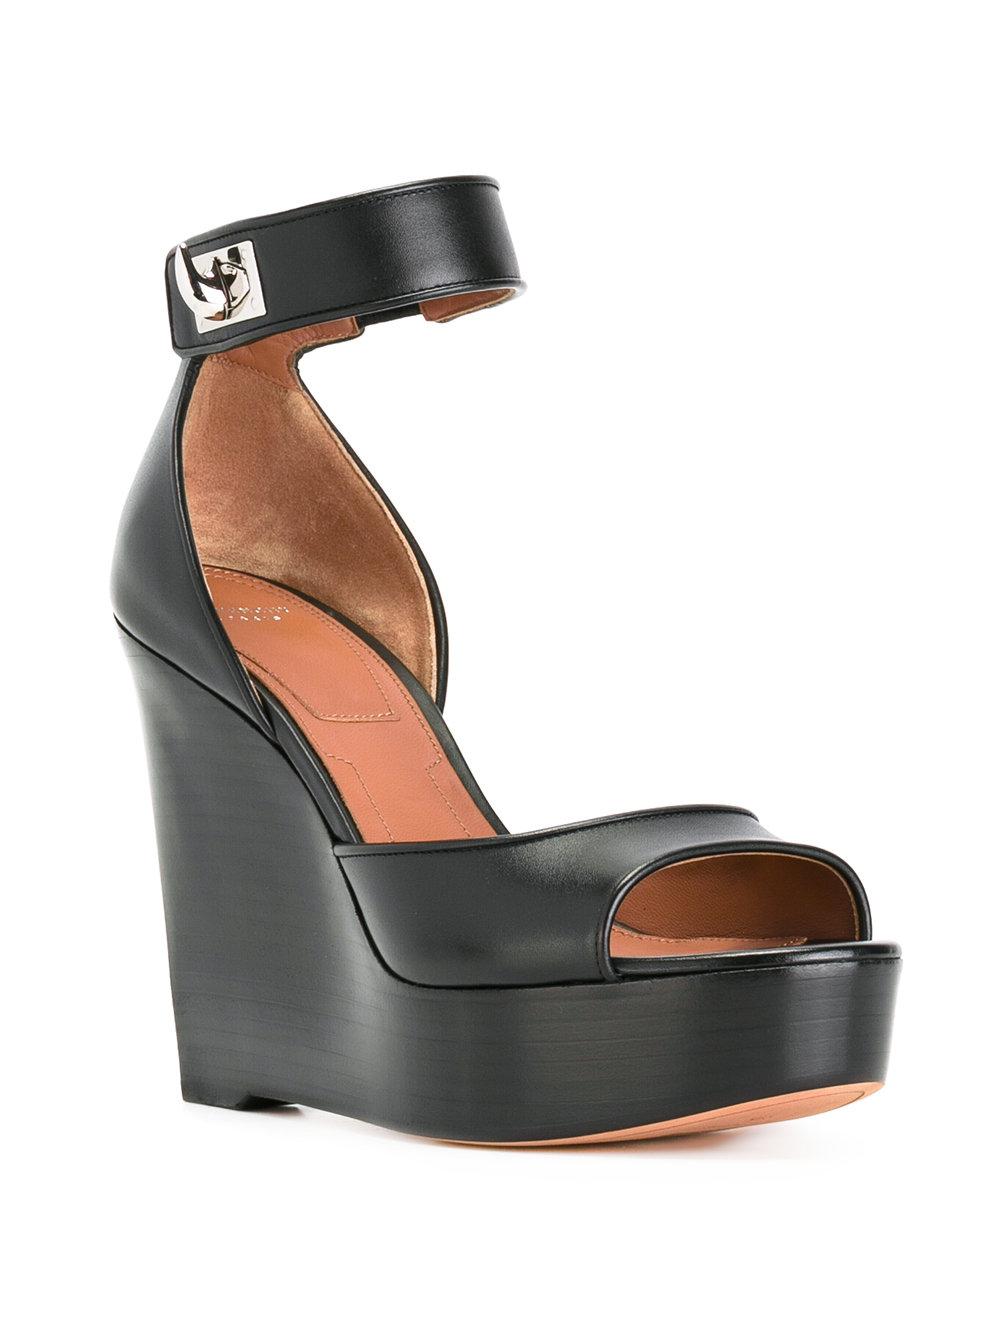 Lyst - Givenchy Lock Strap Wedge Heels in Black